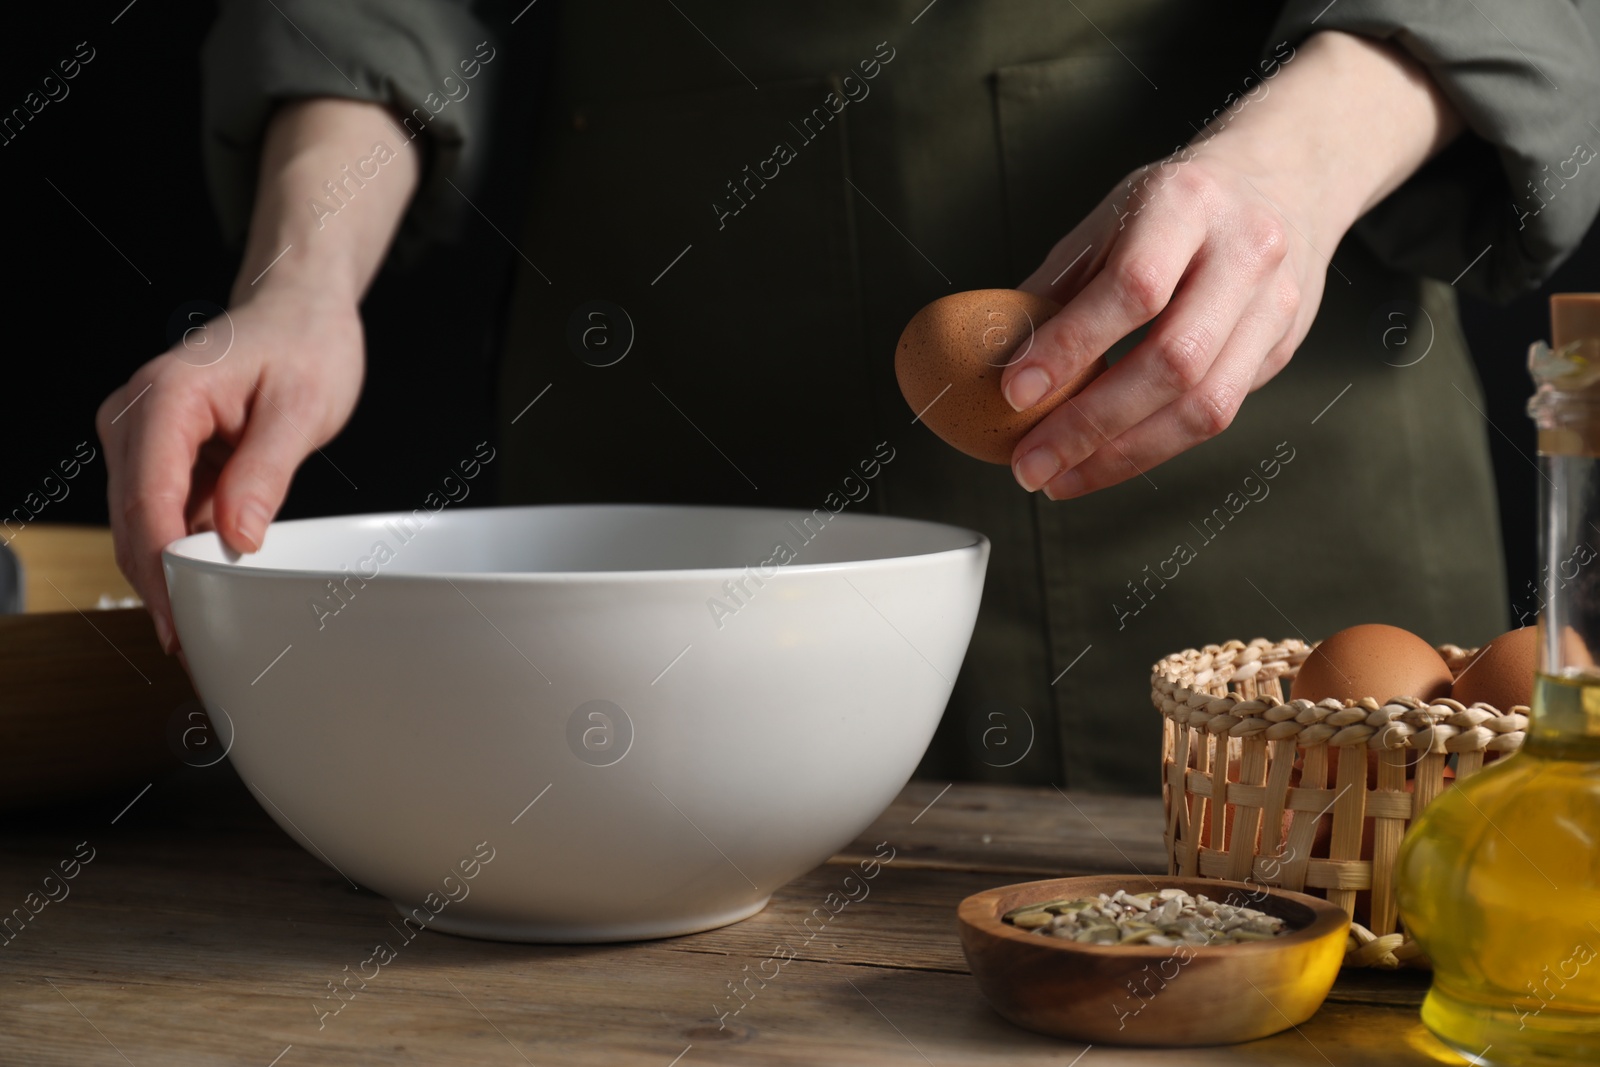 Photo of Making bread. Woman adding egg into dough at wooden table on dark background, closeup